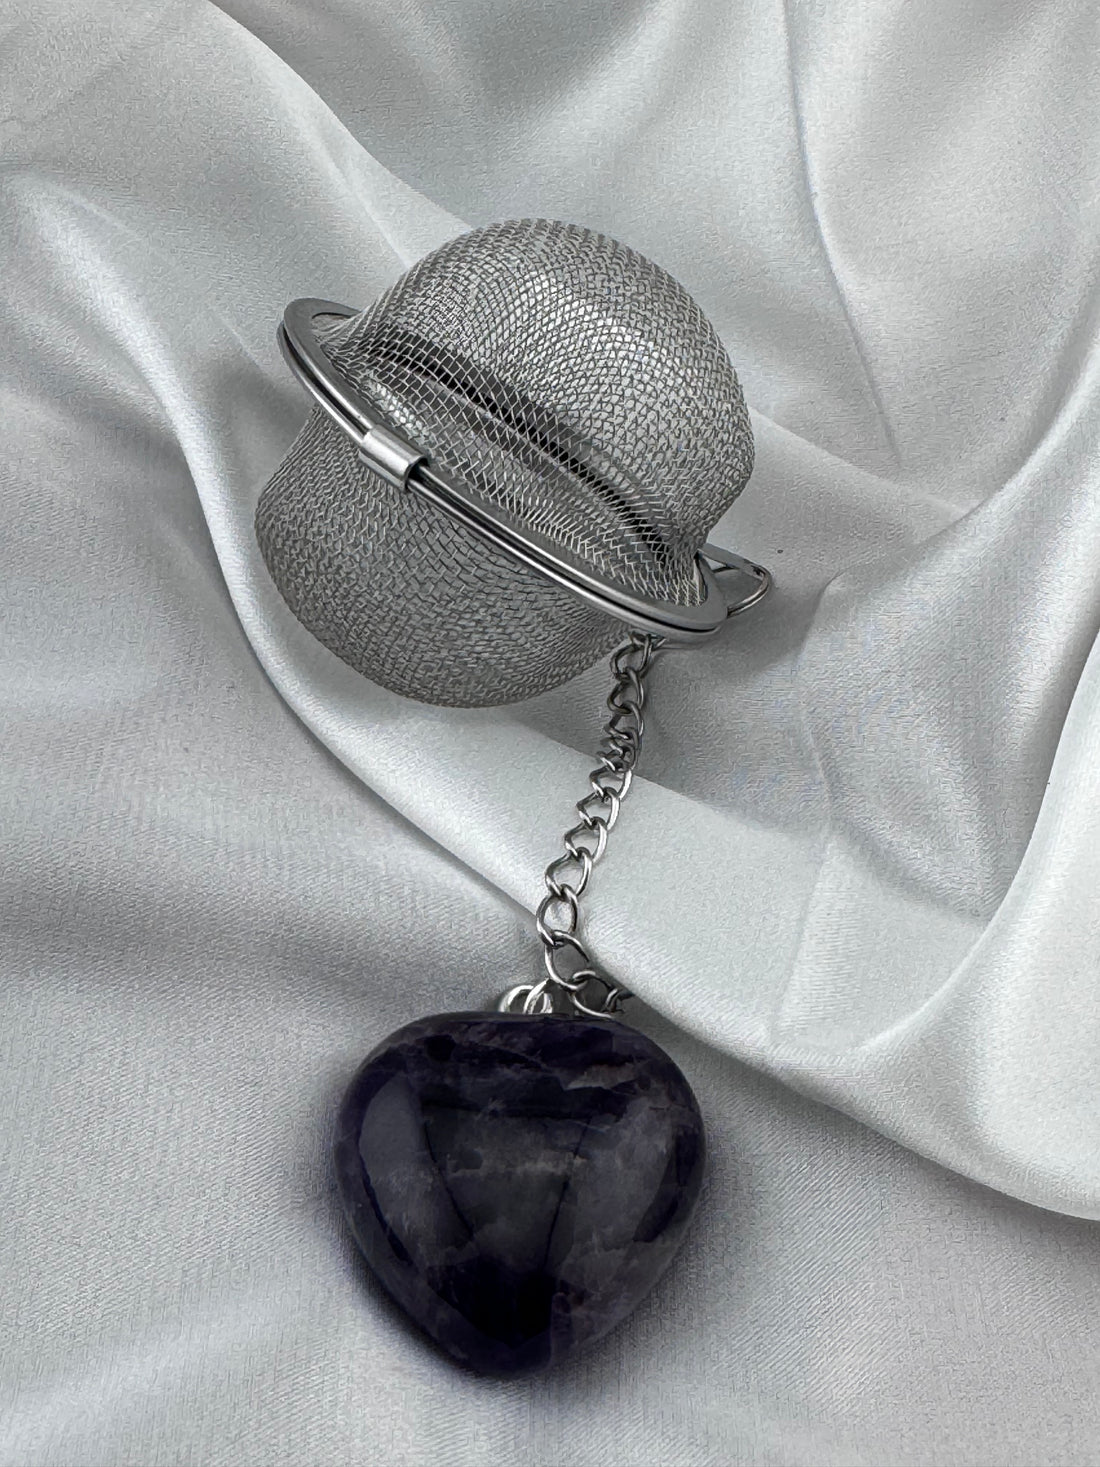 Mesh Tea Strainer Ball With Crystal Weight-Handmade Naturals Inc